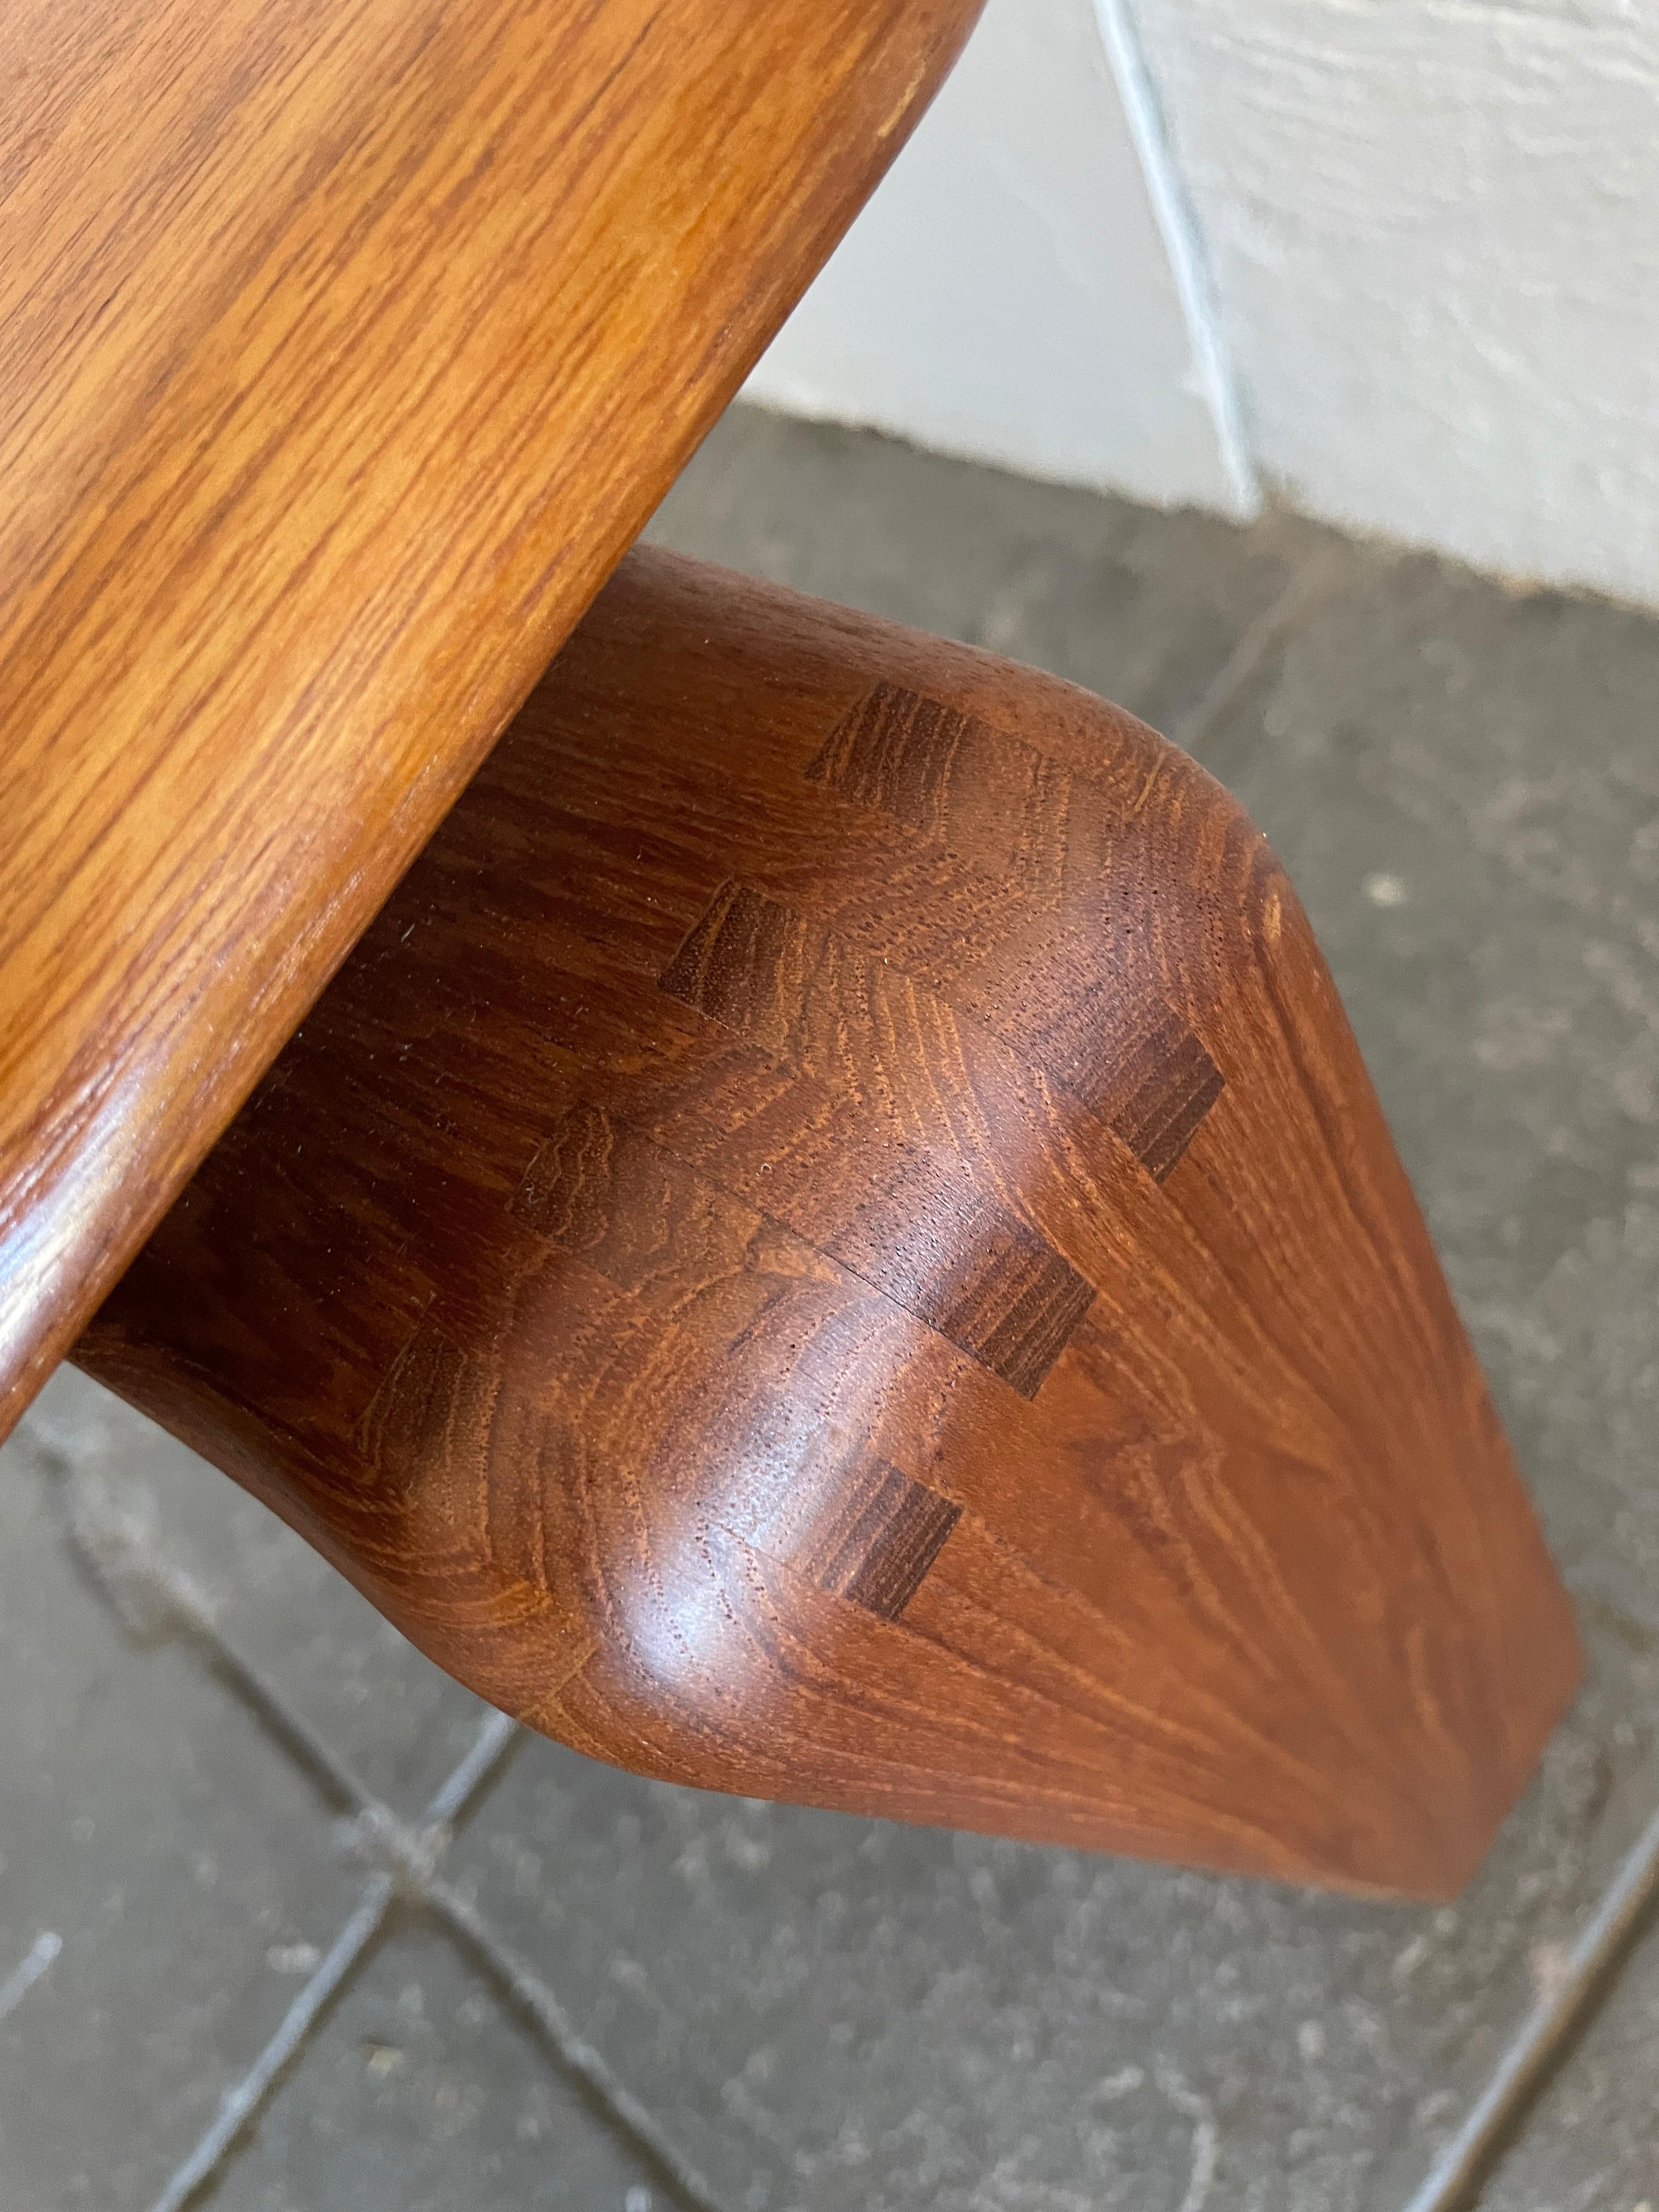 Woodwork Mid Century Danish Modern Solid Teak wood side table or Coffee Table For Sale